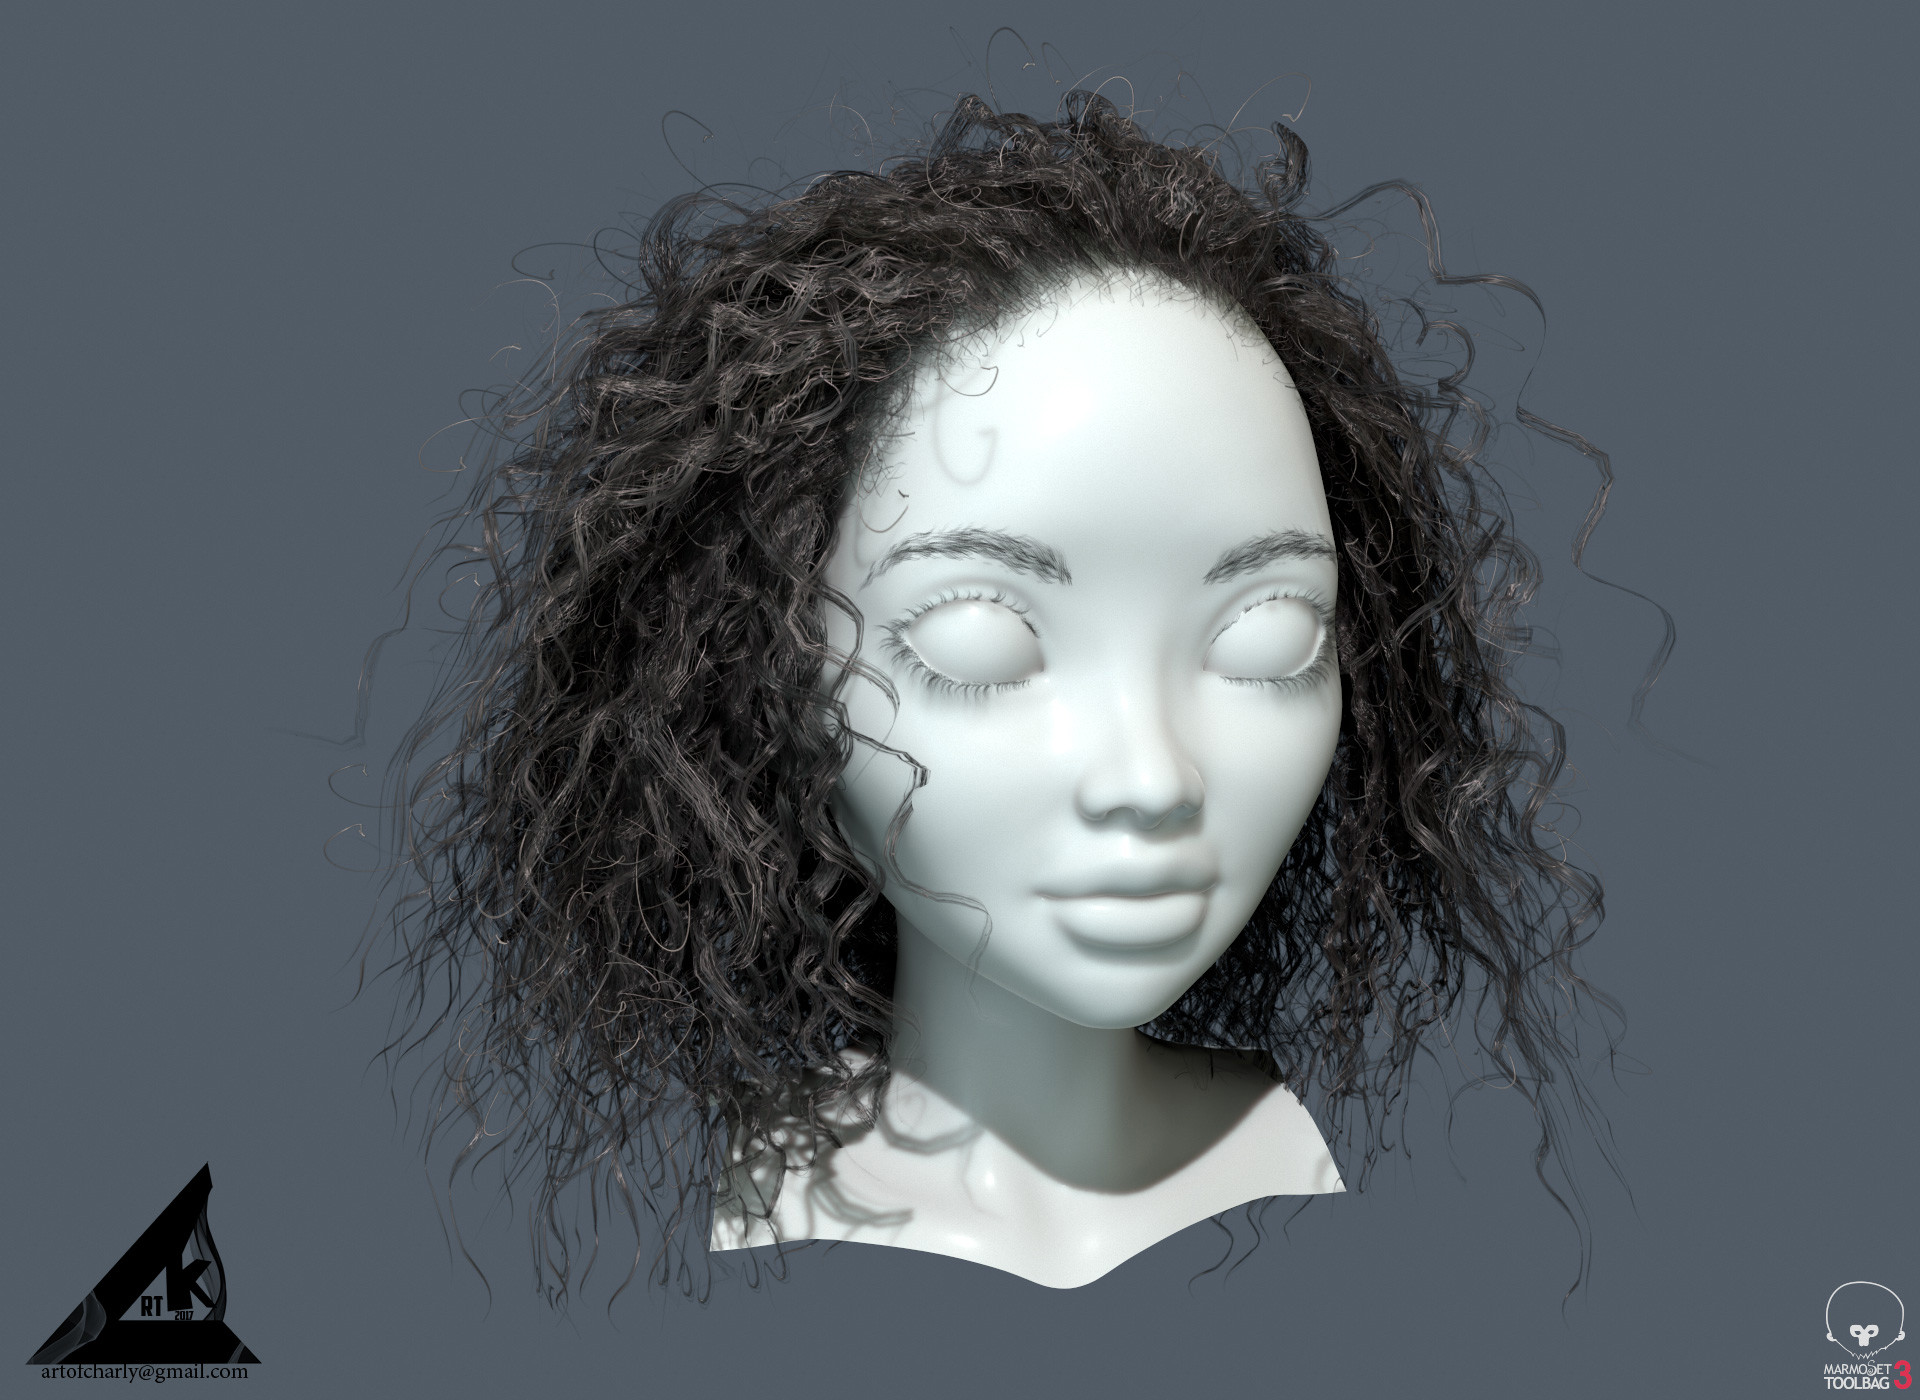 Ornatrix Curly Realtime hair + MiniTutorial + References + 3d model_by Andrew Krivulya Ornatrix Curly Realtime hair Ornatrix Curly Realtime hair,MiniTutorial,Andrew Krivulya